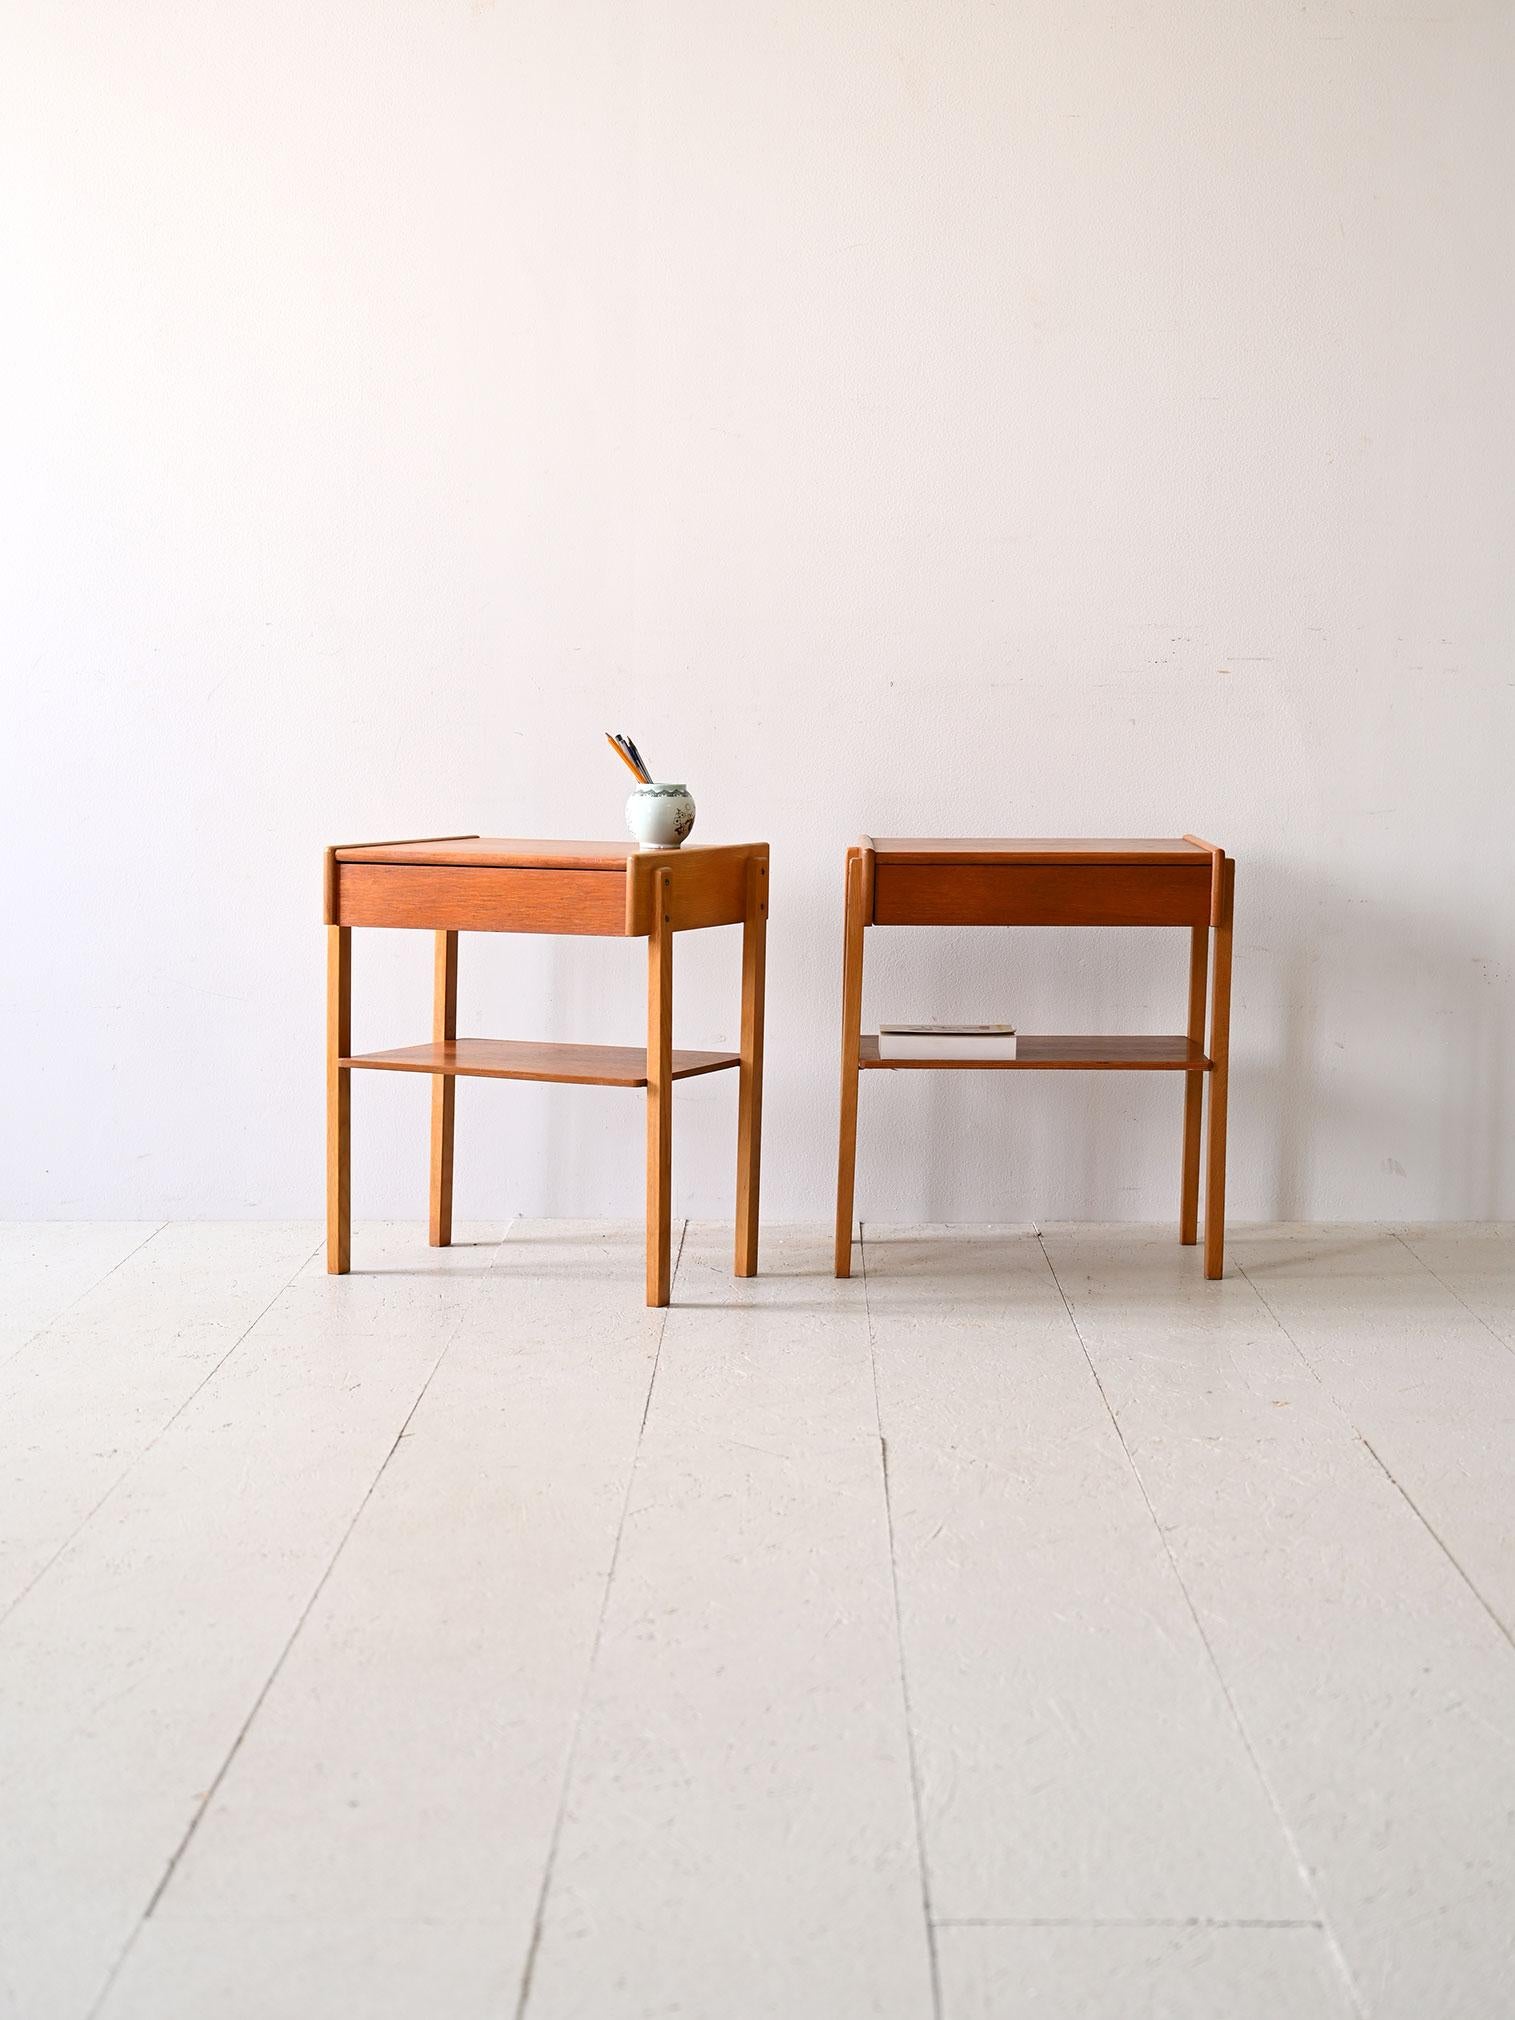 Pair of original vintage 1960s Scandinavian nightstands.

This pair of Swedish nightstands from the 1960s stand out for their minimal Scandinavian design, characterized by clean, simple lines. The pull-out drawer provides storage space for personal